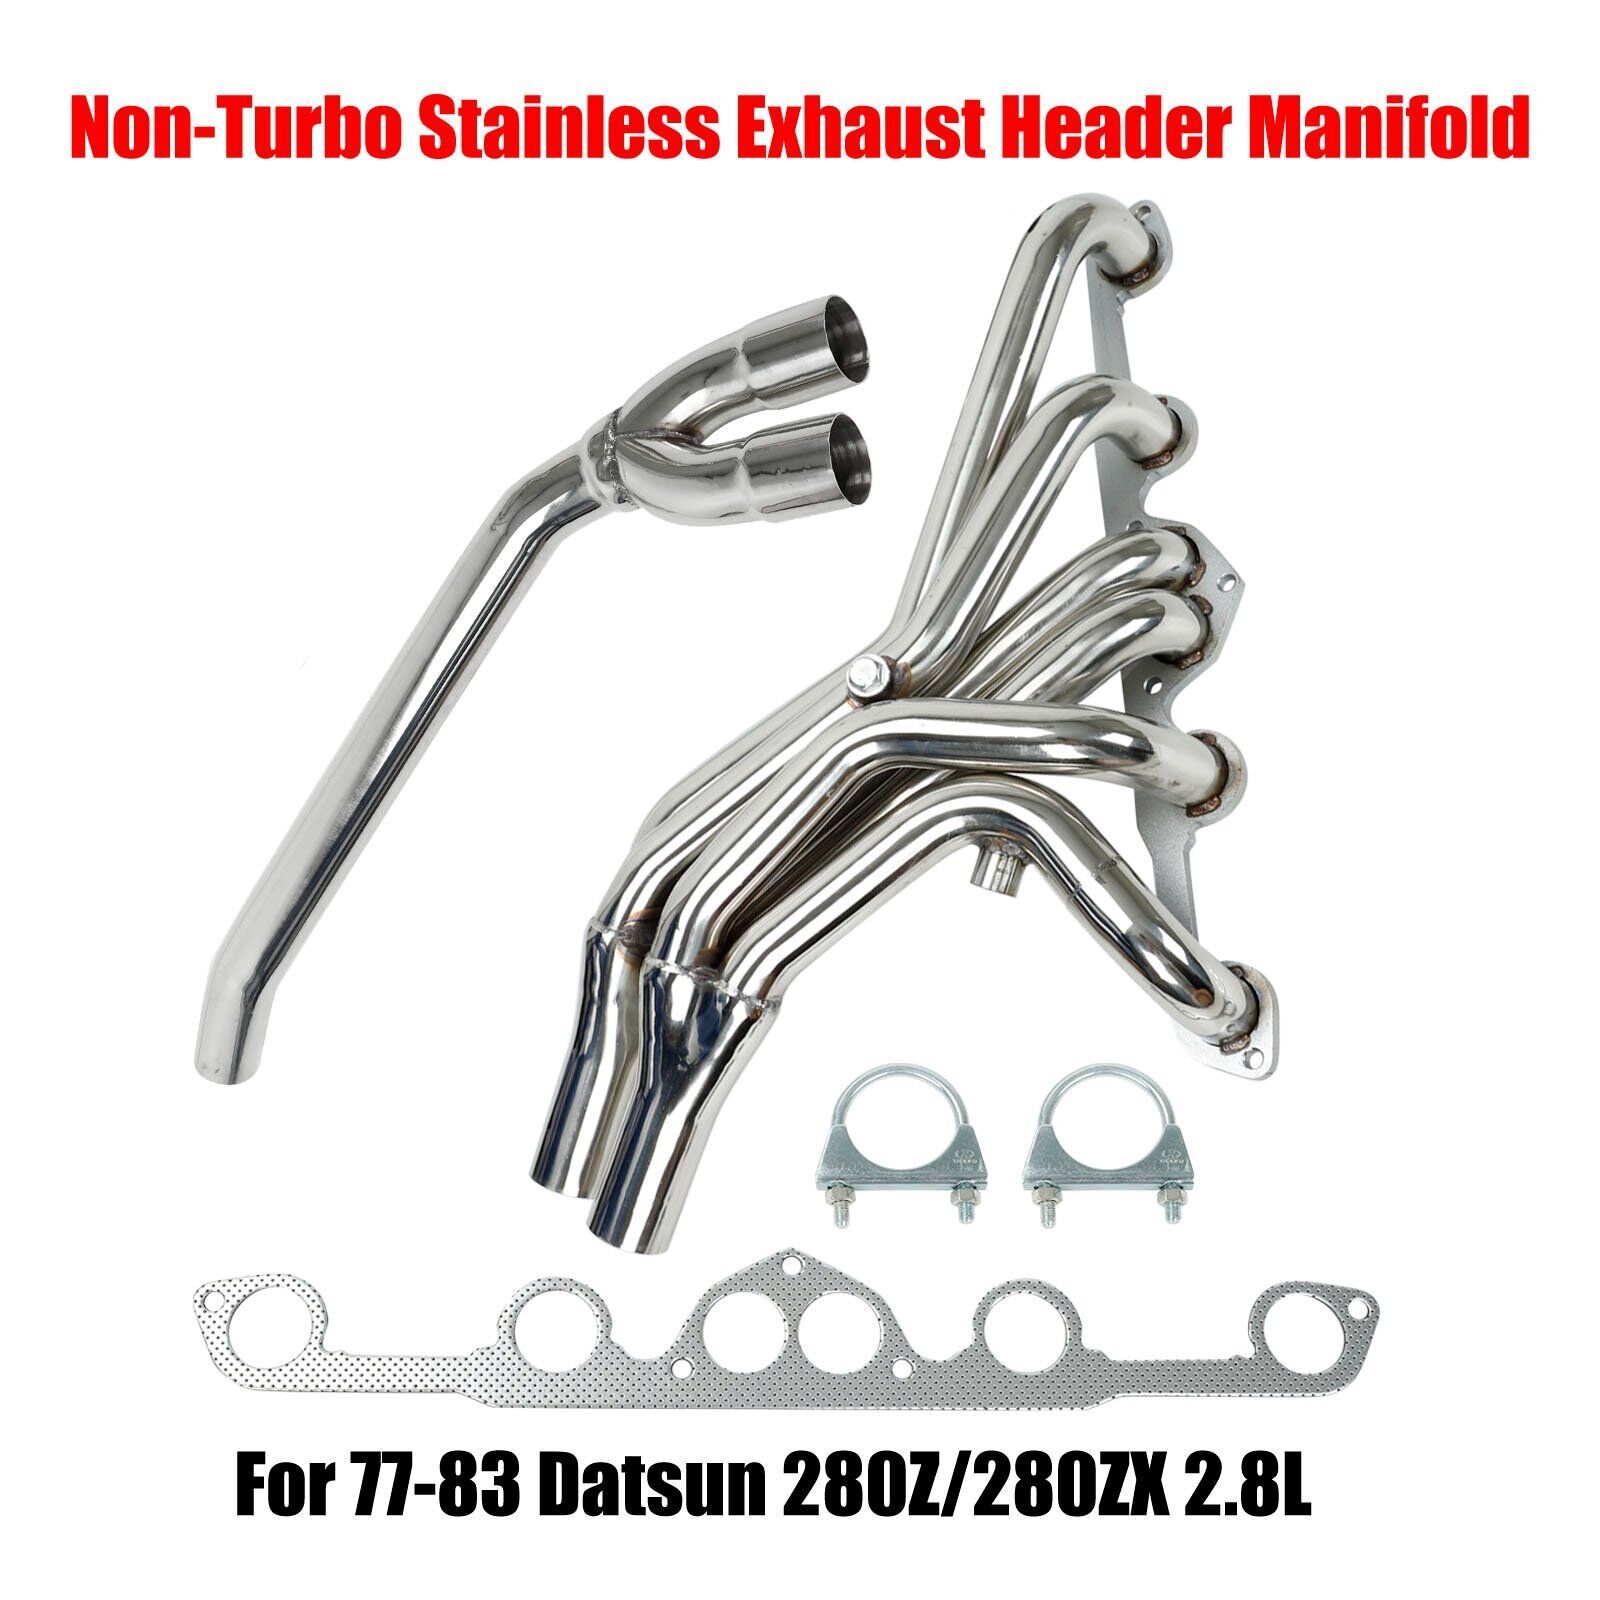 For 77-83 Nissan/Datsun 280Z 280ZX L28E 2.8L Non-Turbo Stainless Exhaust Header